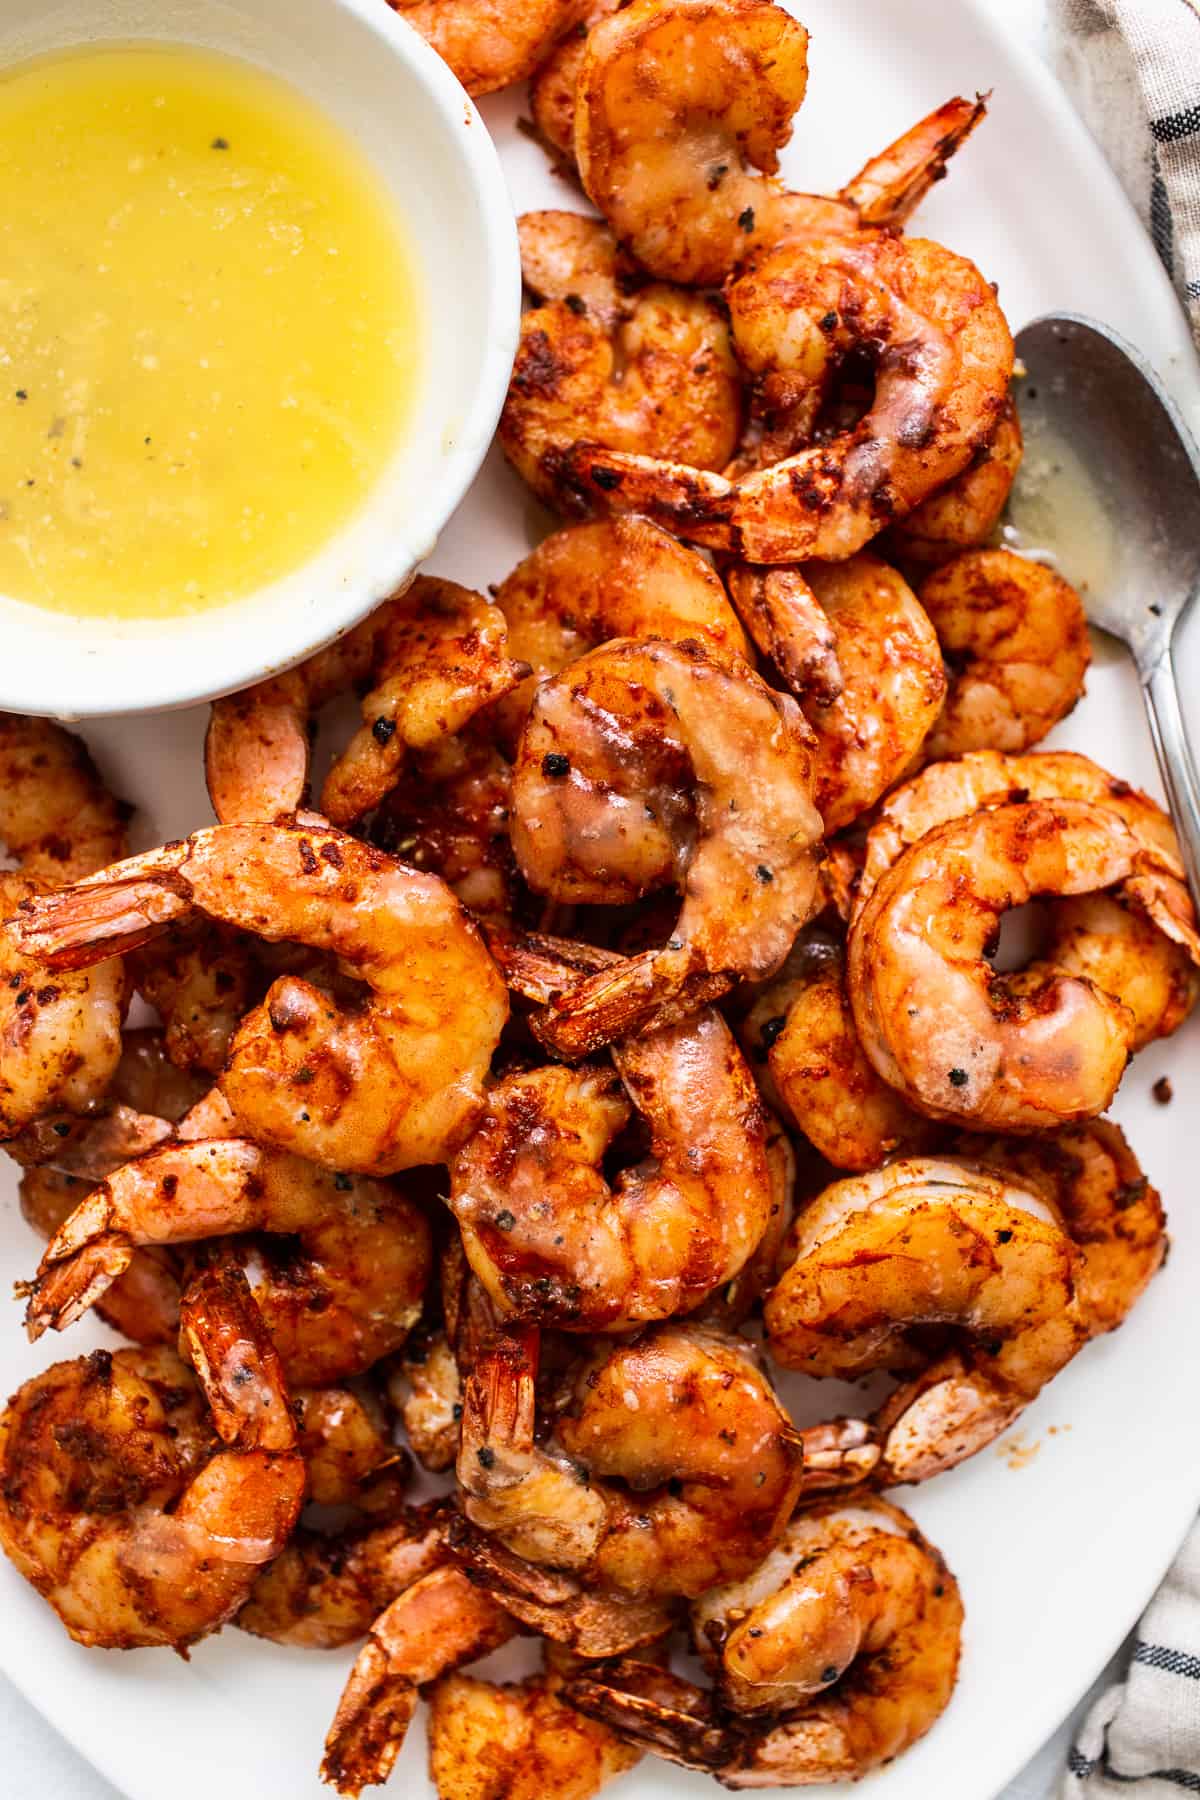 Broiled shrimp on a plate with a bowl of honey butter.